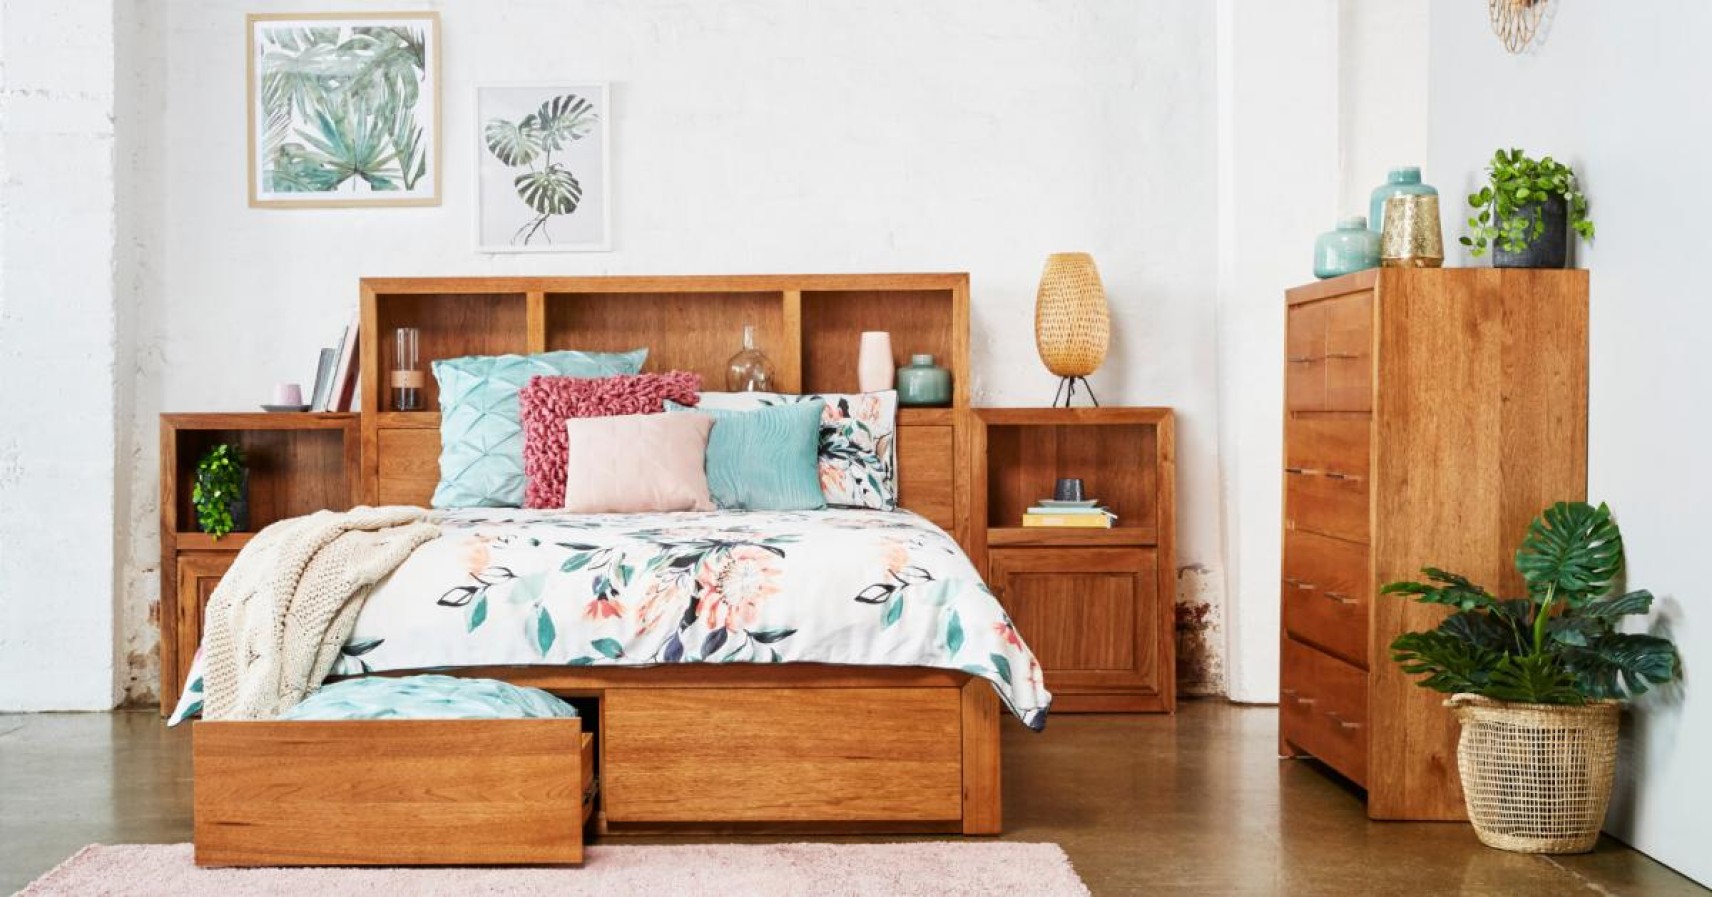 A bedroom showcasing clever storage hacks